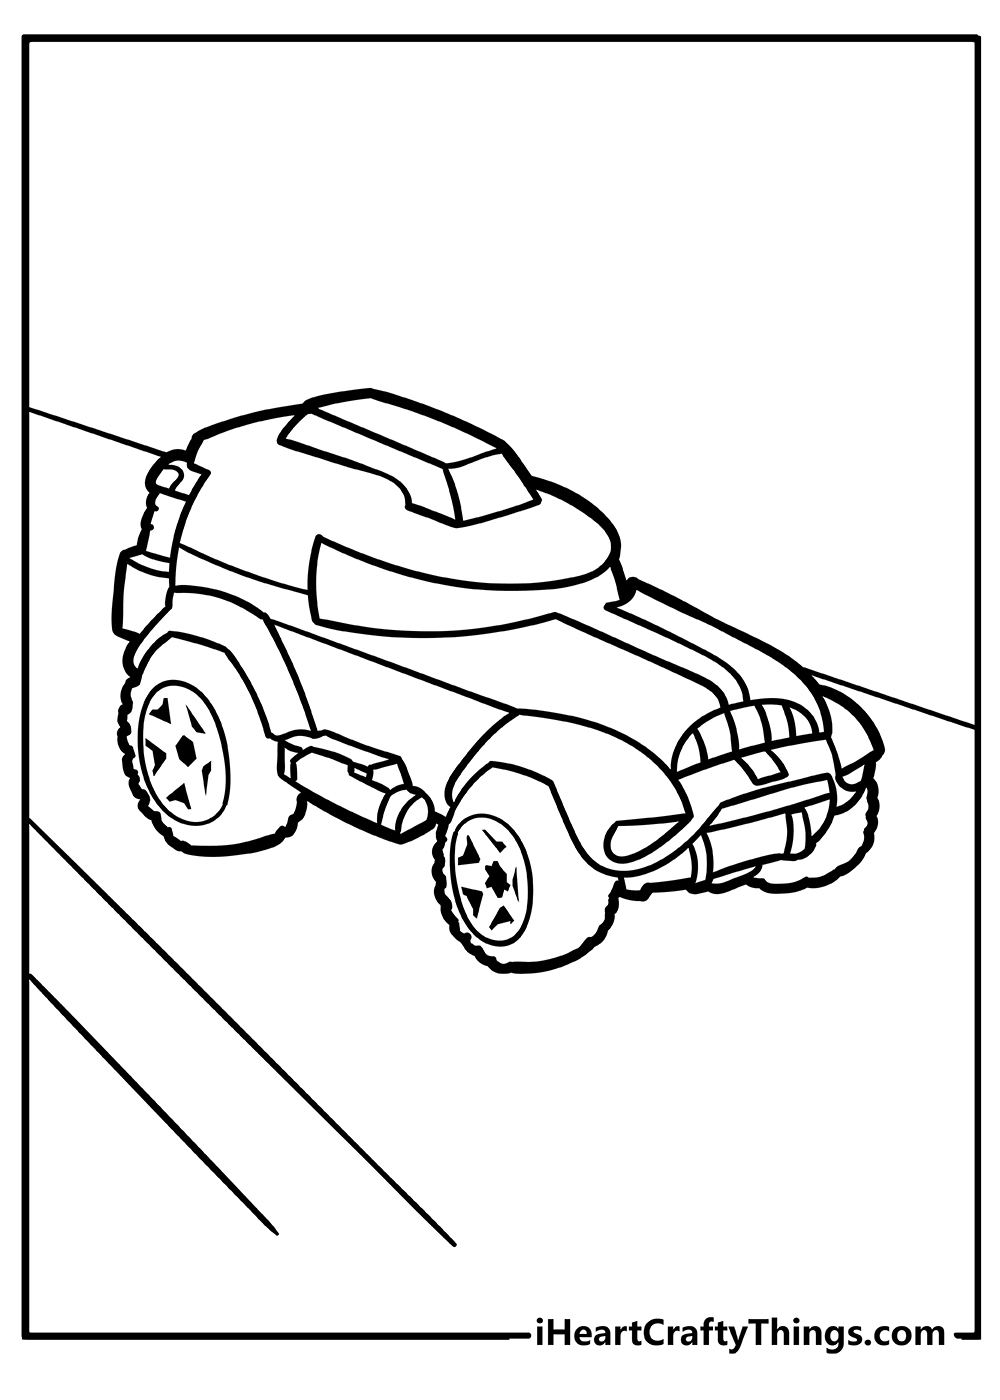 Hot Wheels Coloring Pages for adults free printable